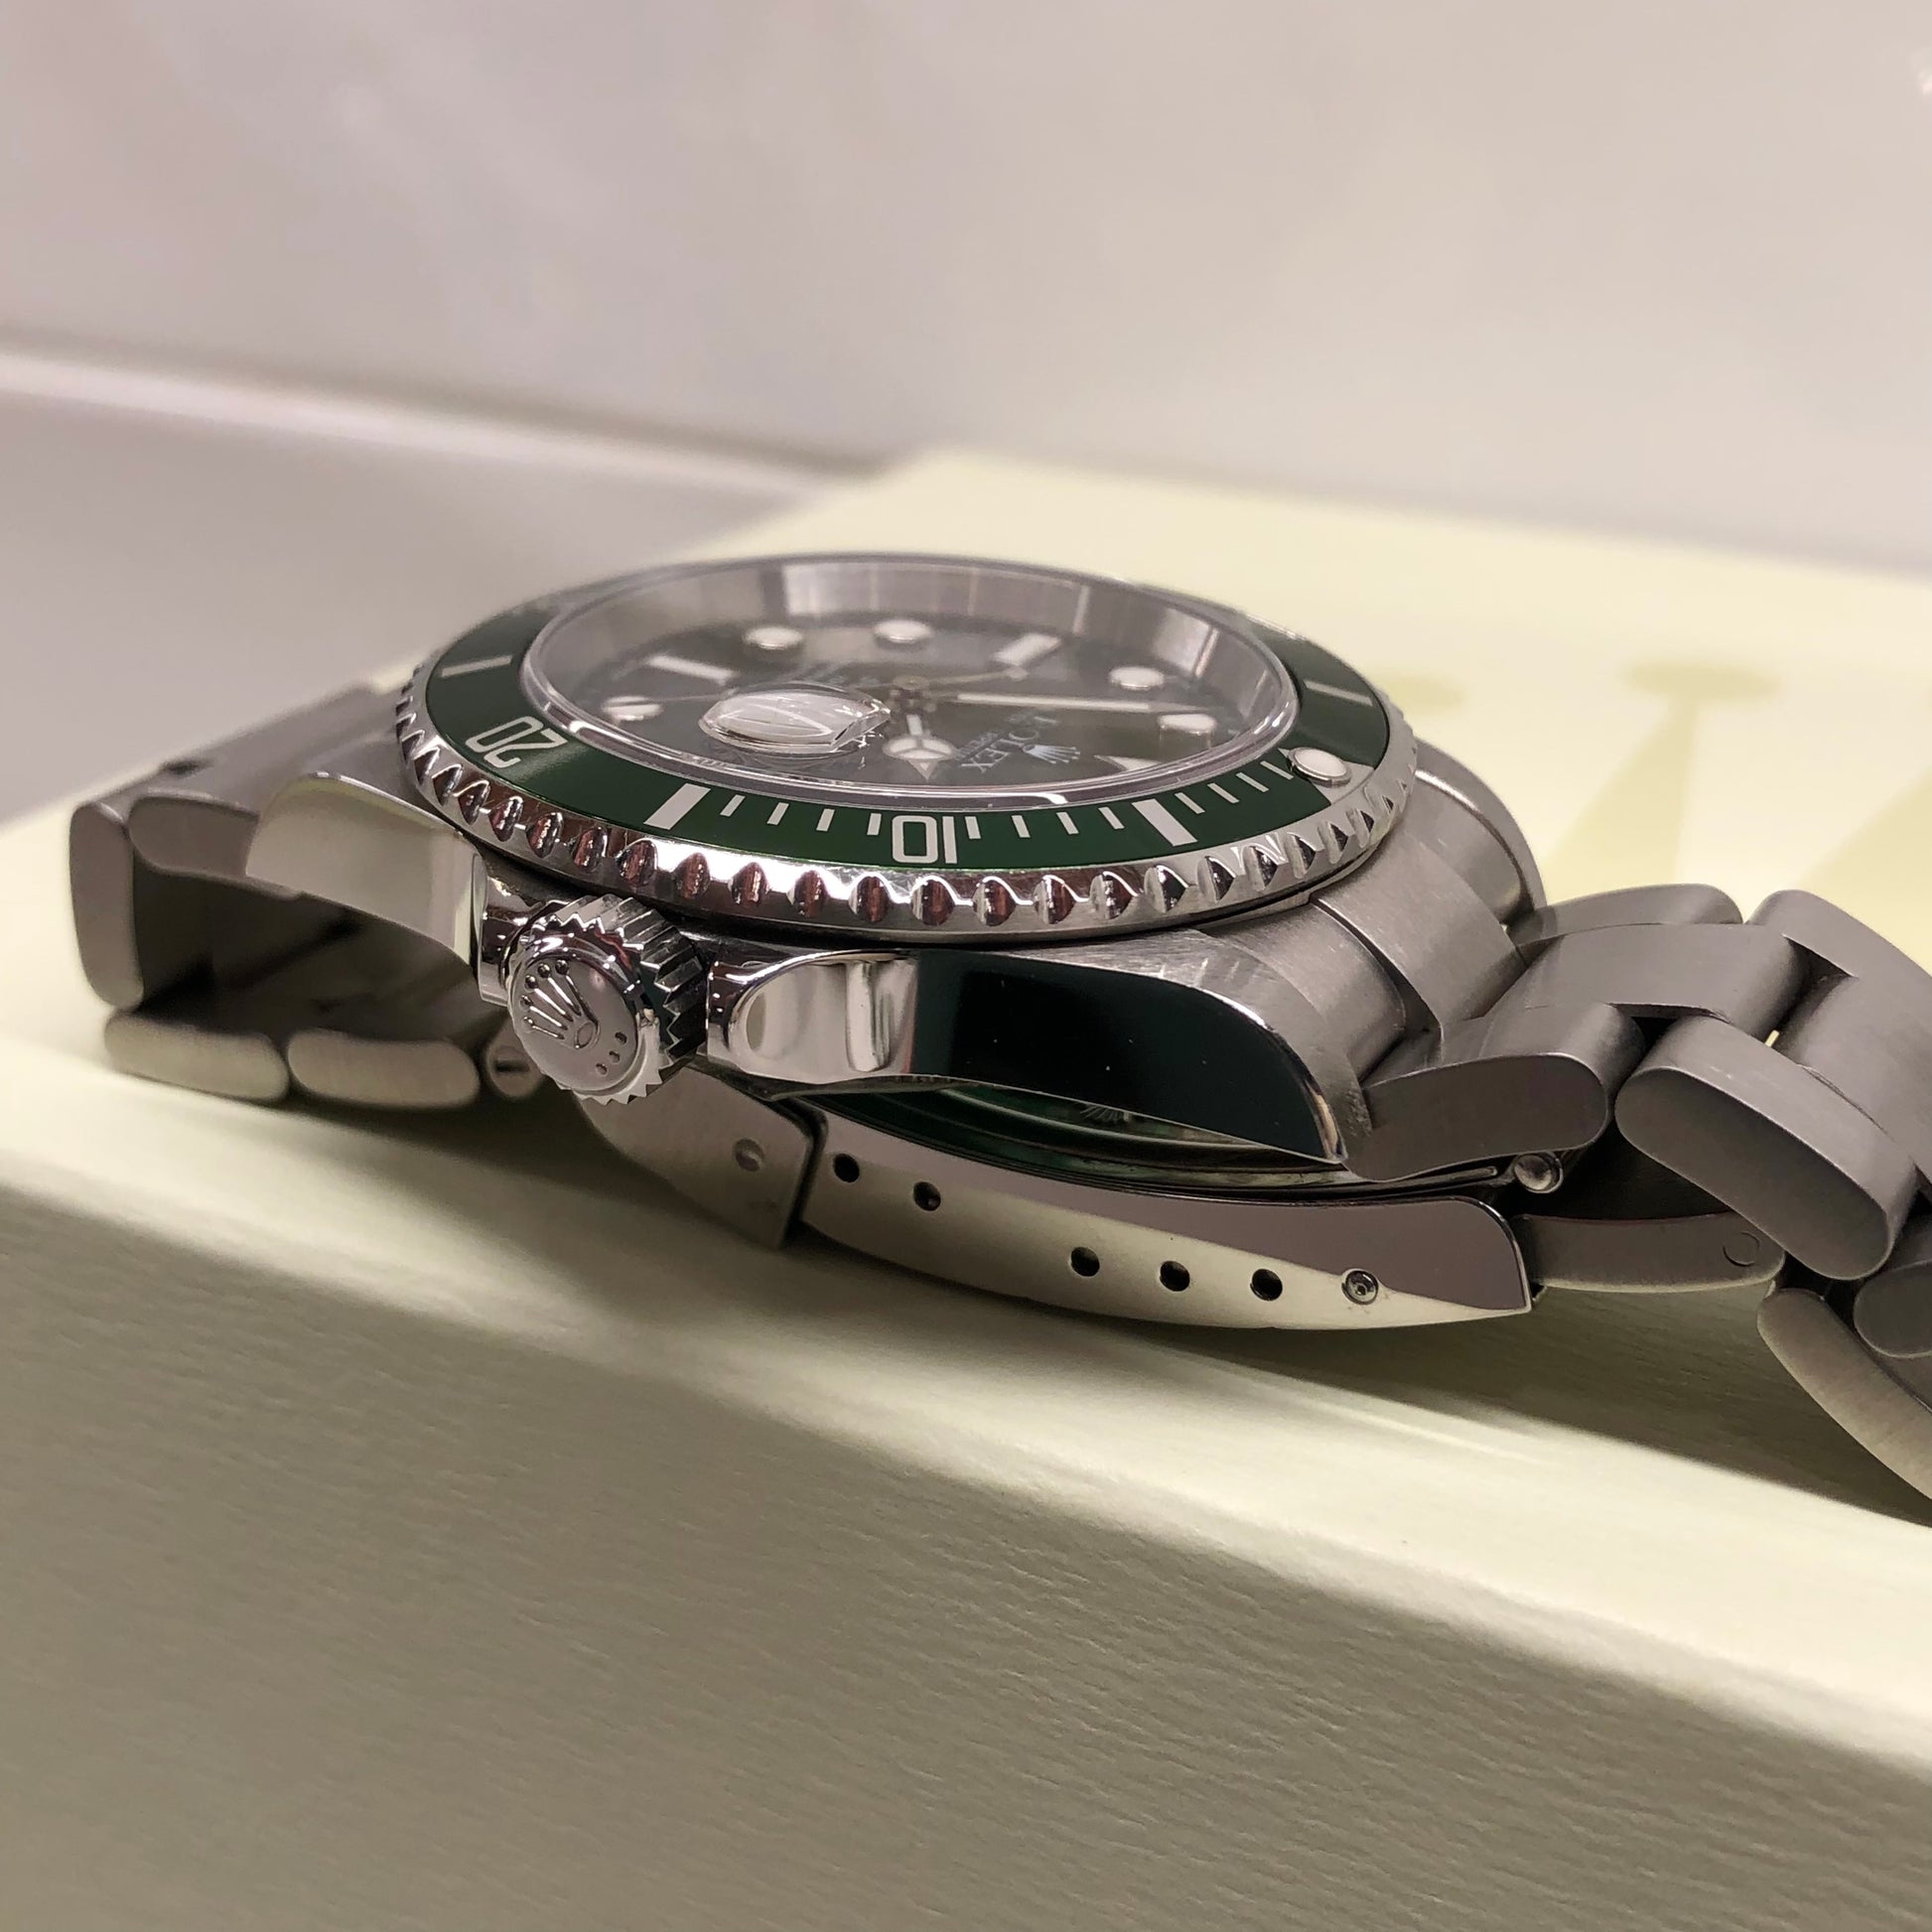 Rolex Submariner 50th Anniversary Edition with Green Bezel